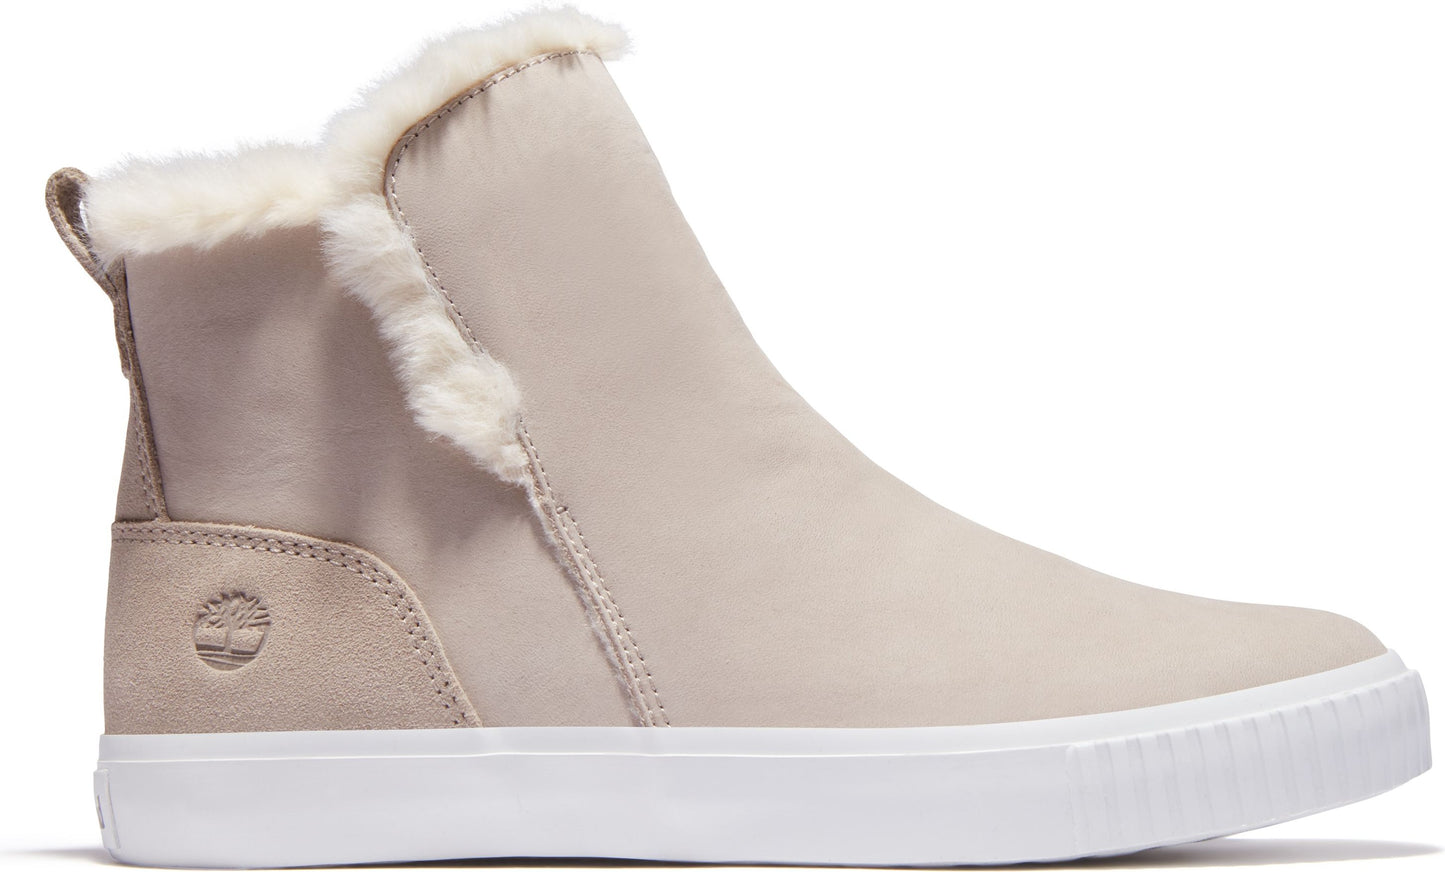 Timberland Boots Skyla Bay Pull On Light Taupe